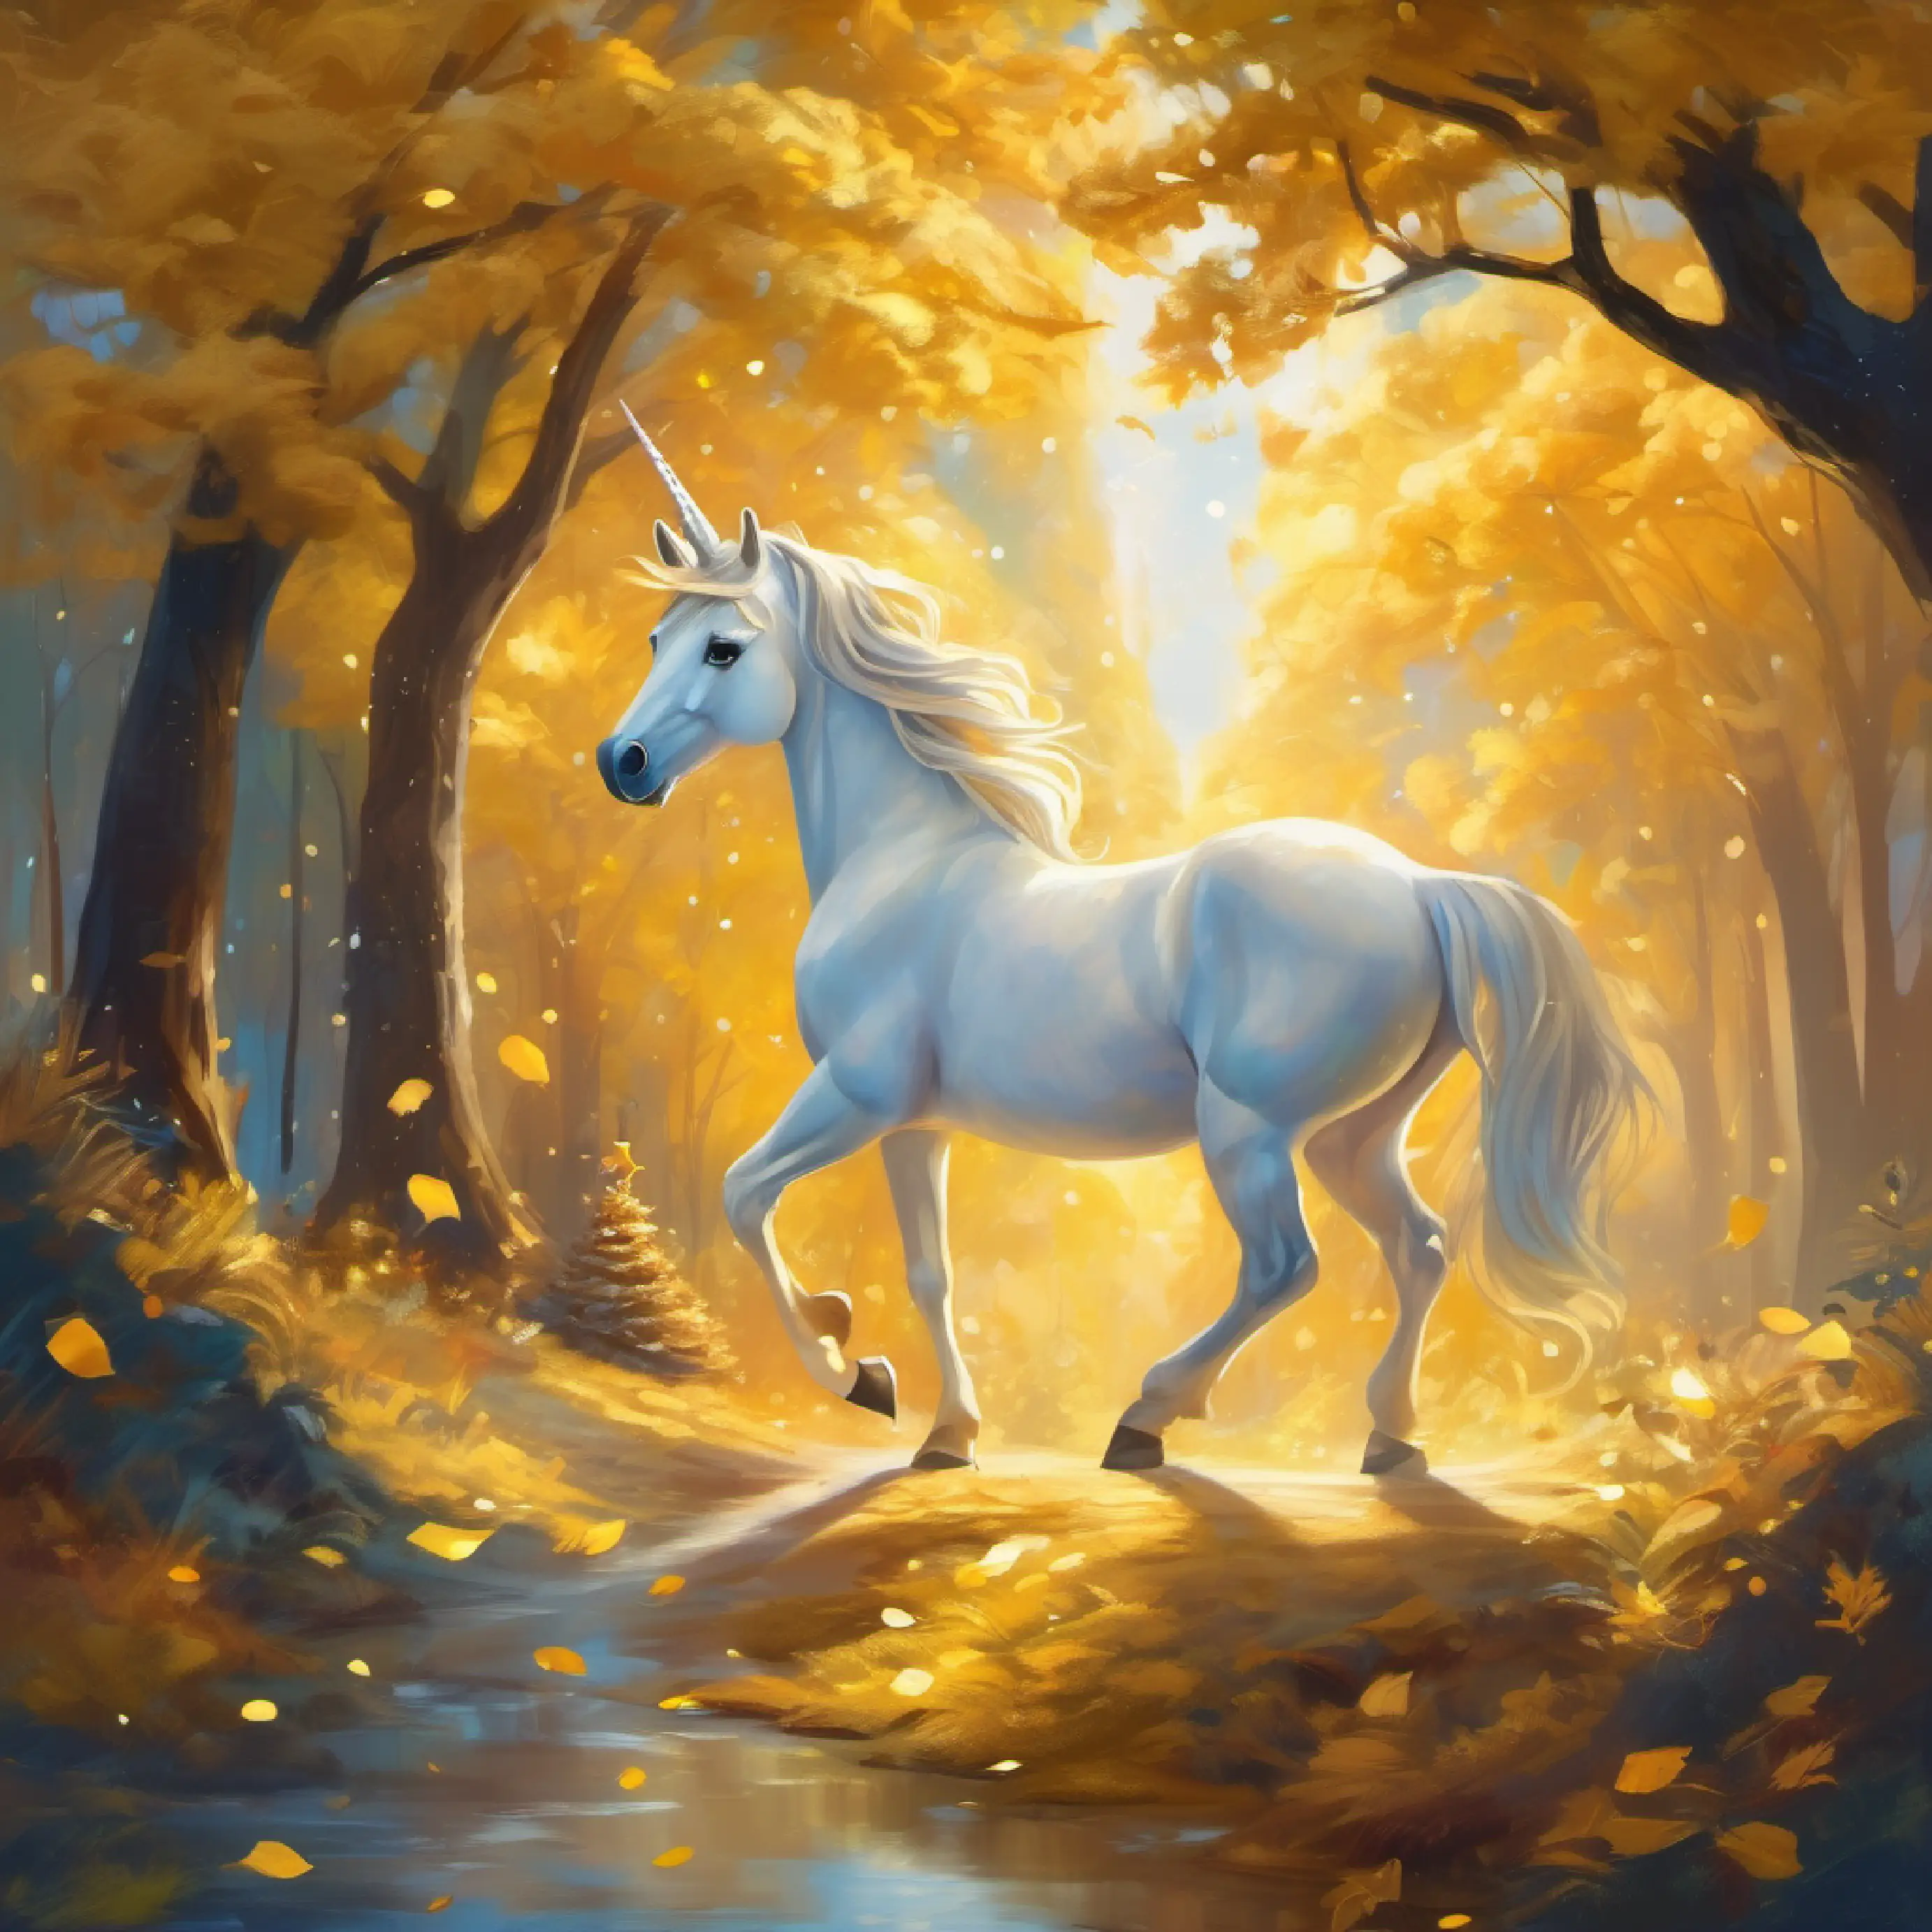 Young unicorn, golden hoof, stardust trail, eyes reflecting bravery is self-conscious about her difference and isolates herself.